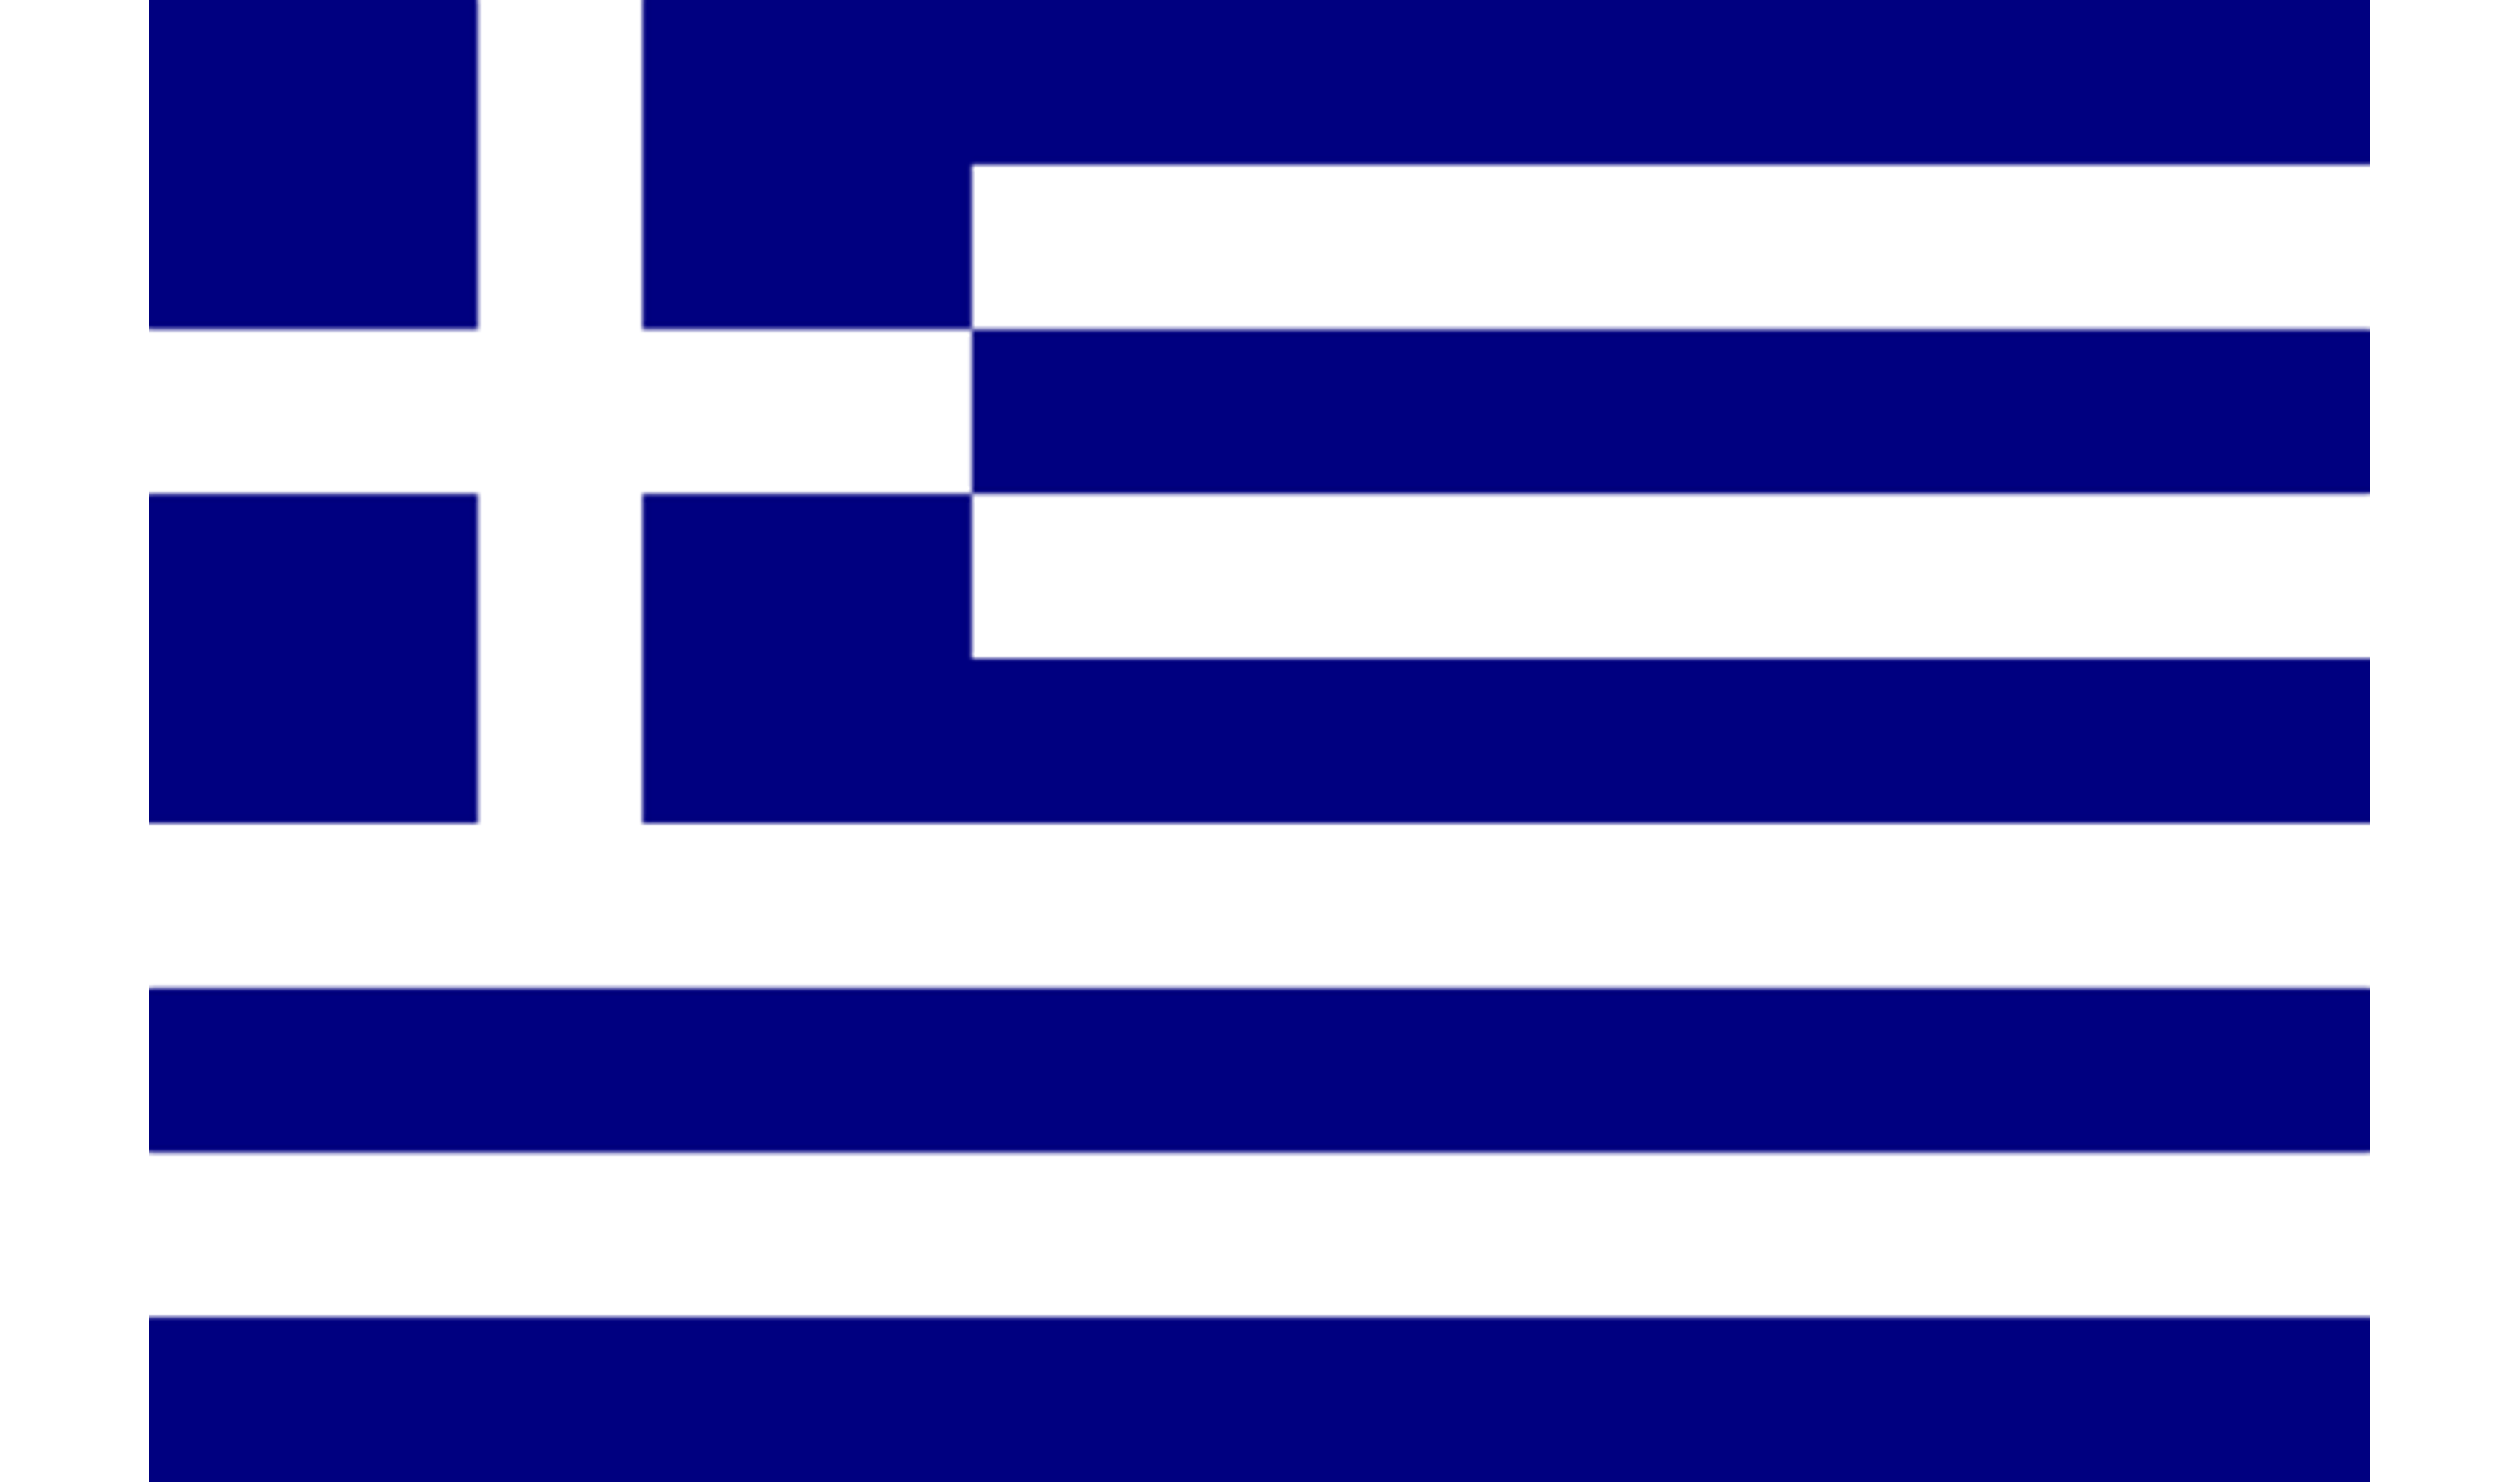 New law in Greece on energy storage activities